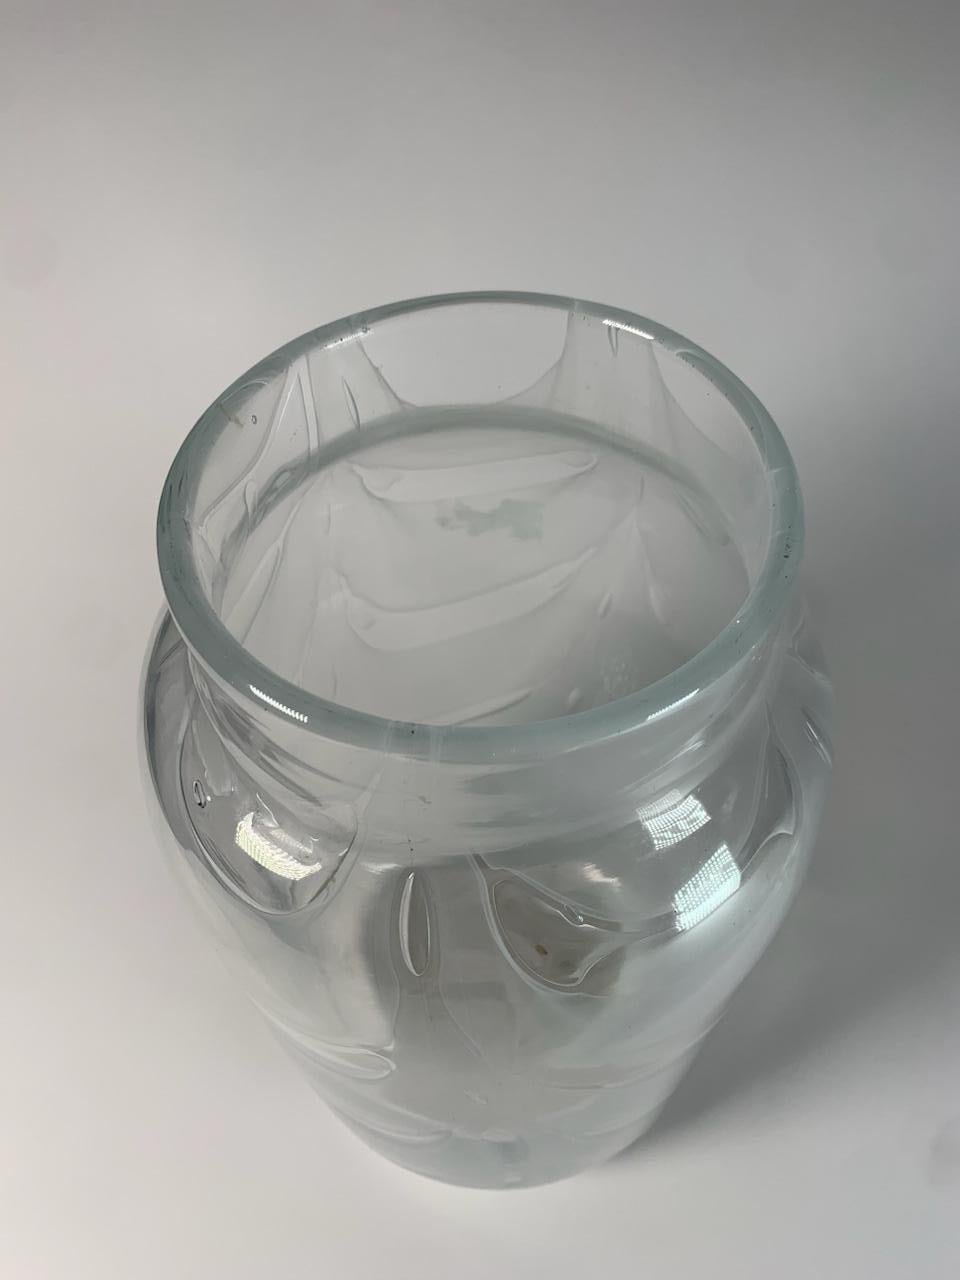 Murano glass vase Graffito model by Ercole Barovier for Barovier&Toso in 1970. Signed.

Biography
Ercole Barovier was born in 1889 in a well-known family of glassmakers.
At the age of 26, he becomes the artistic director of his father’s factory,